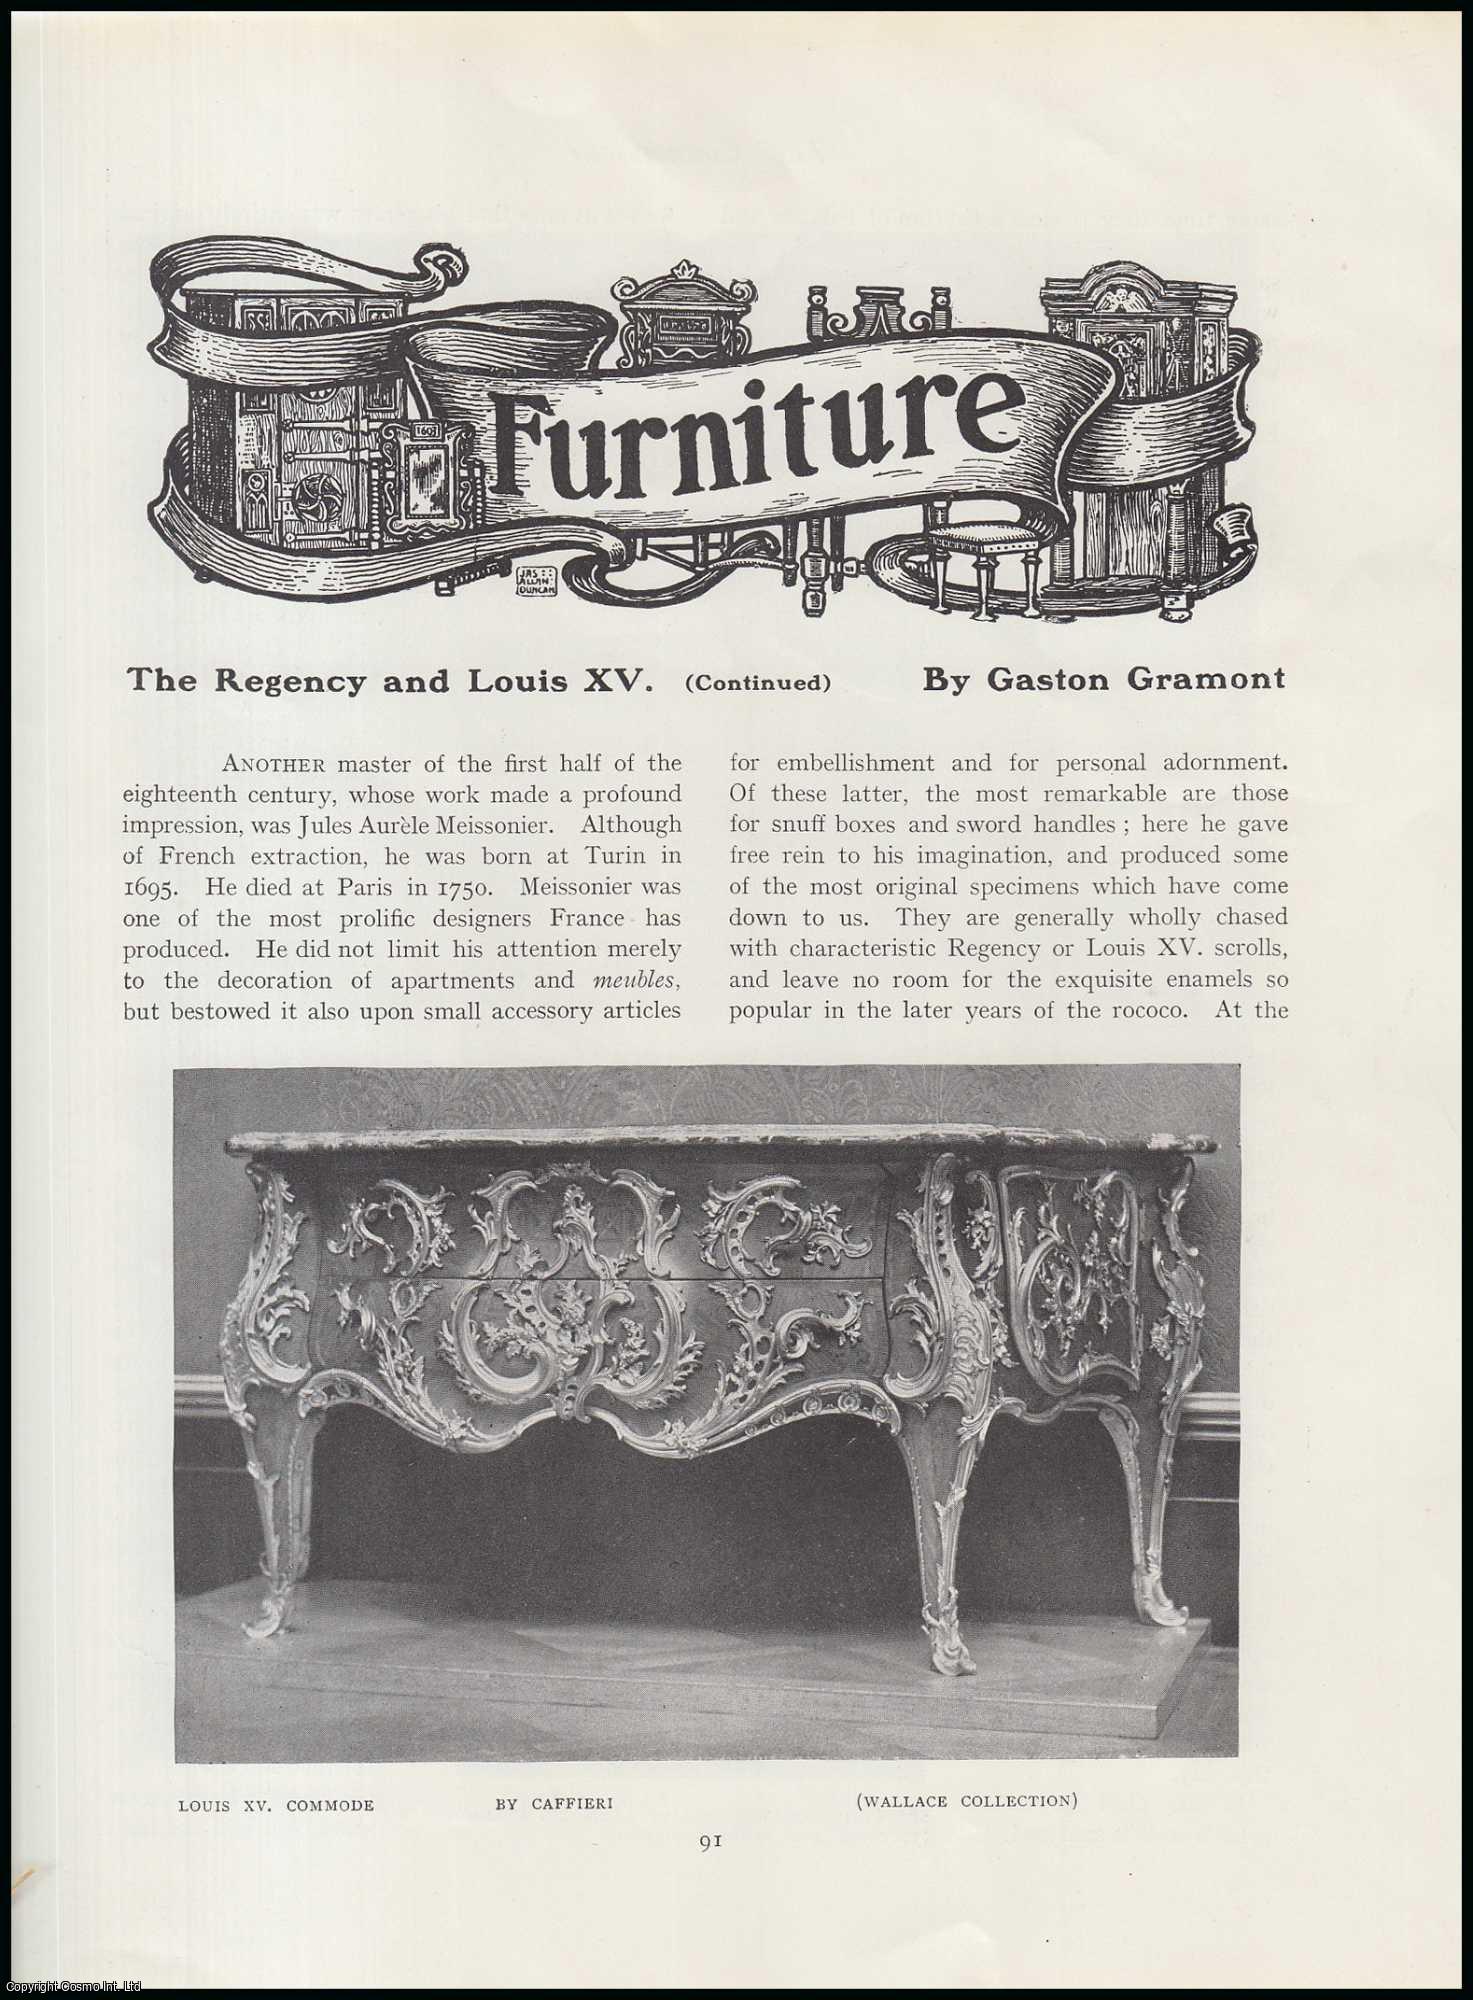 Gaston Gramont - The Regency and Louis XV (part 3) Furniture. An original article from The Connoisseur, 1905.